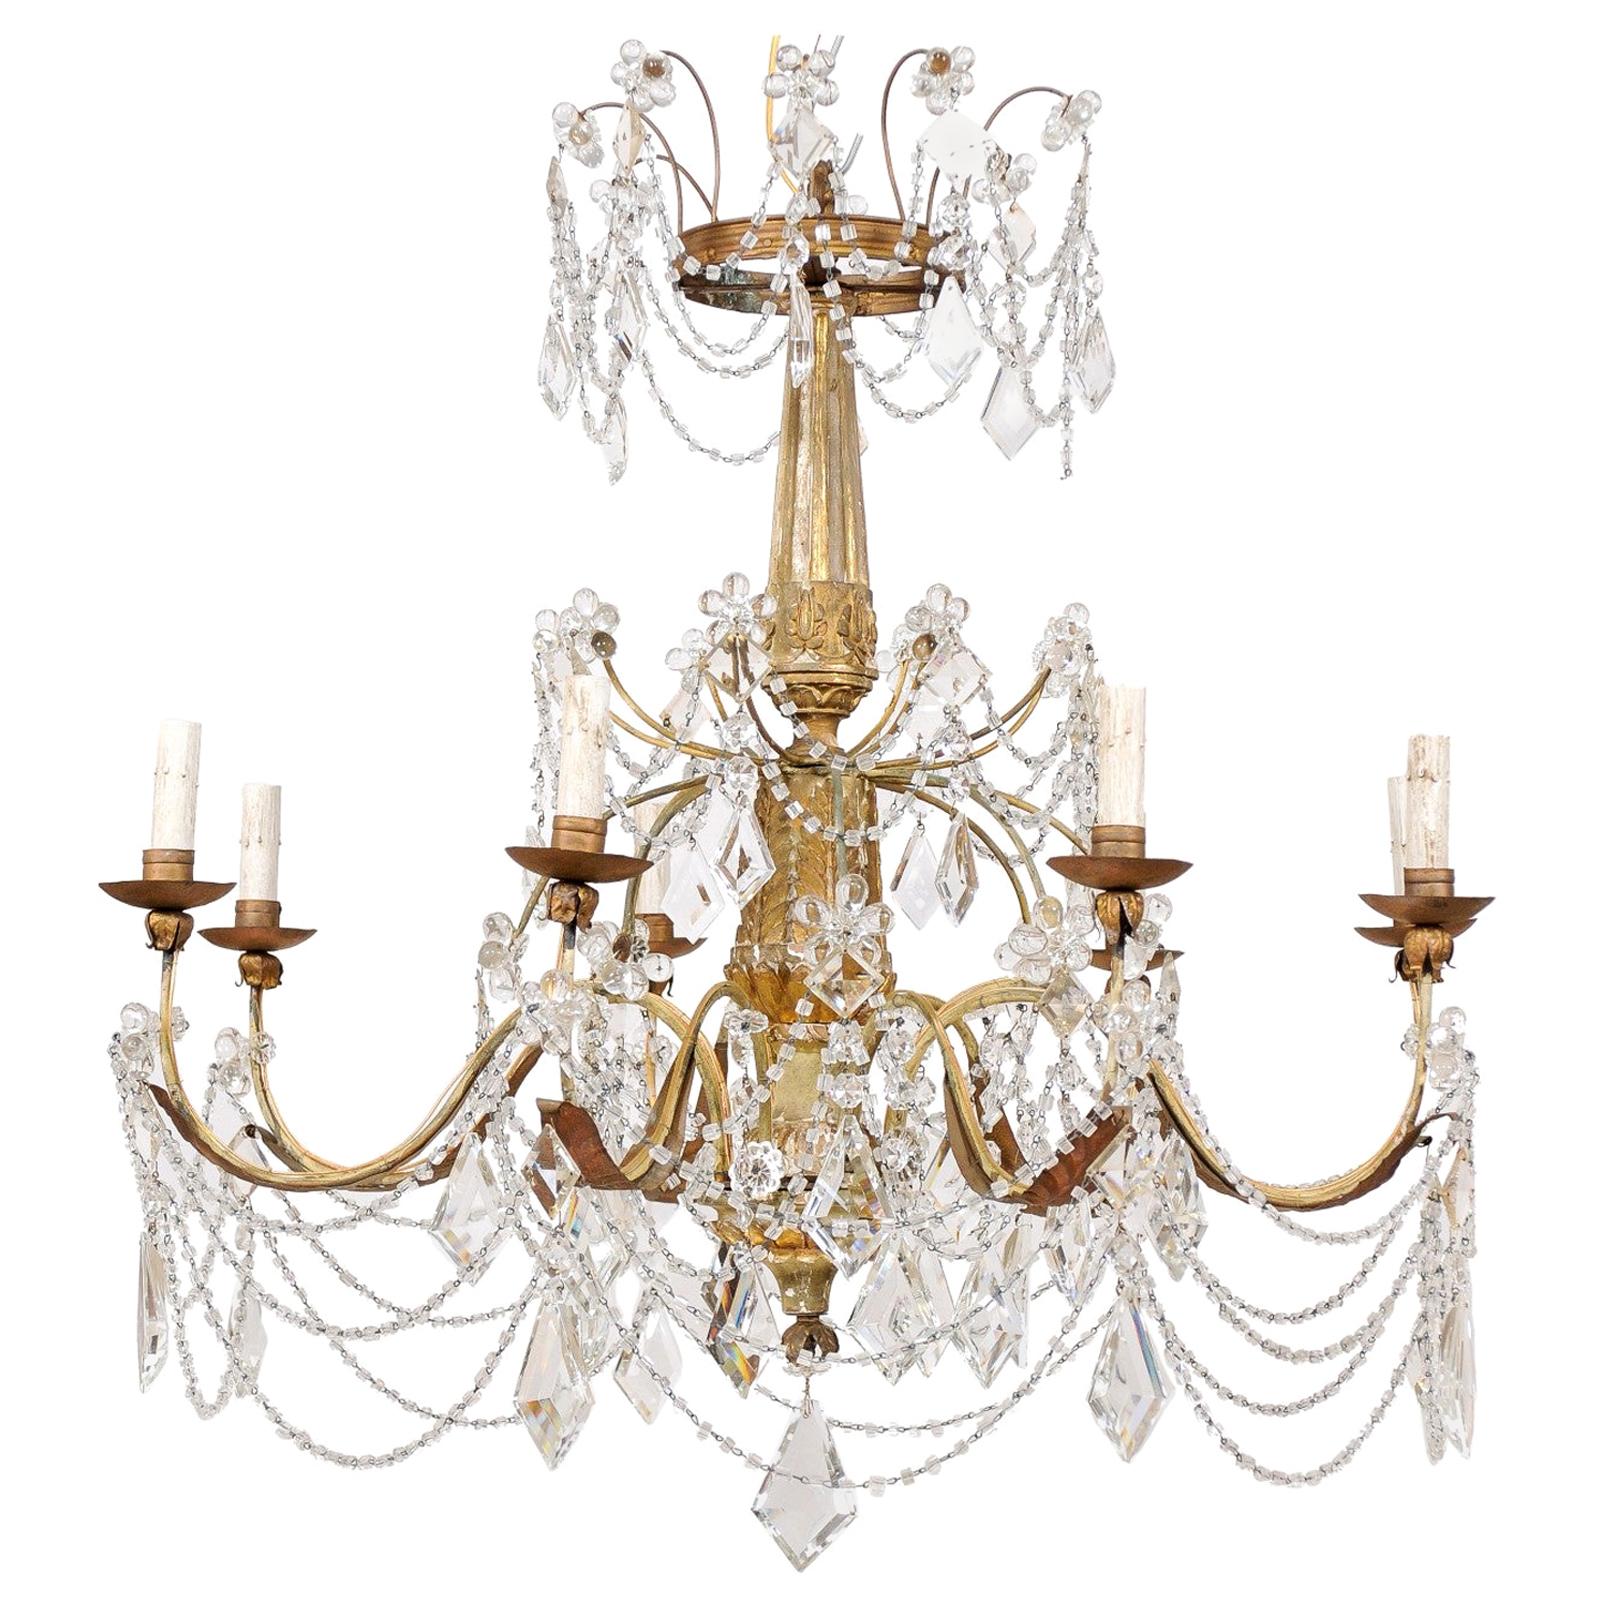 Elegant Italian Crystal and Giltwood Eight-Light Chandelier, Early 20th Century